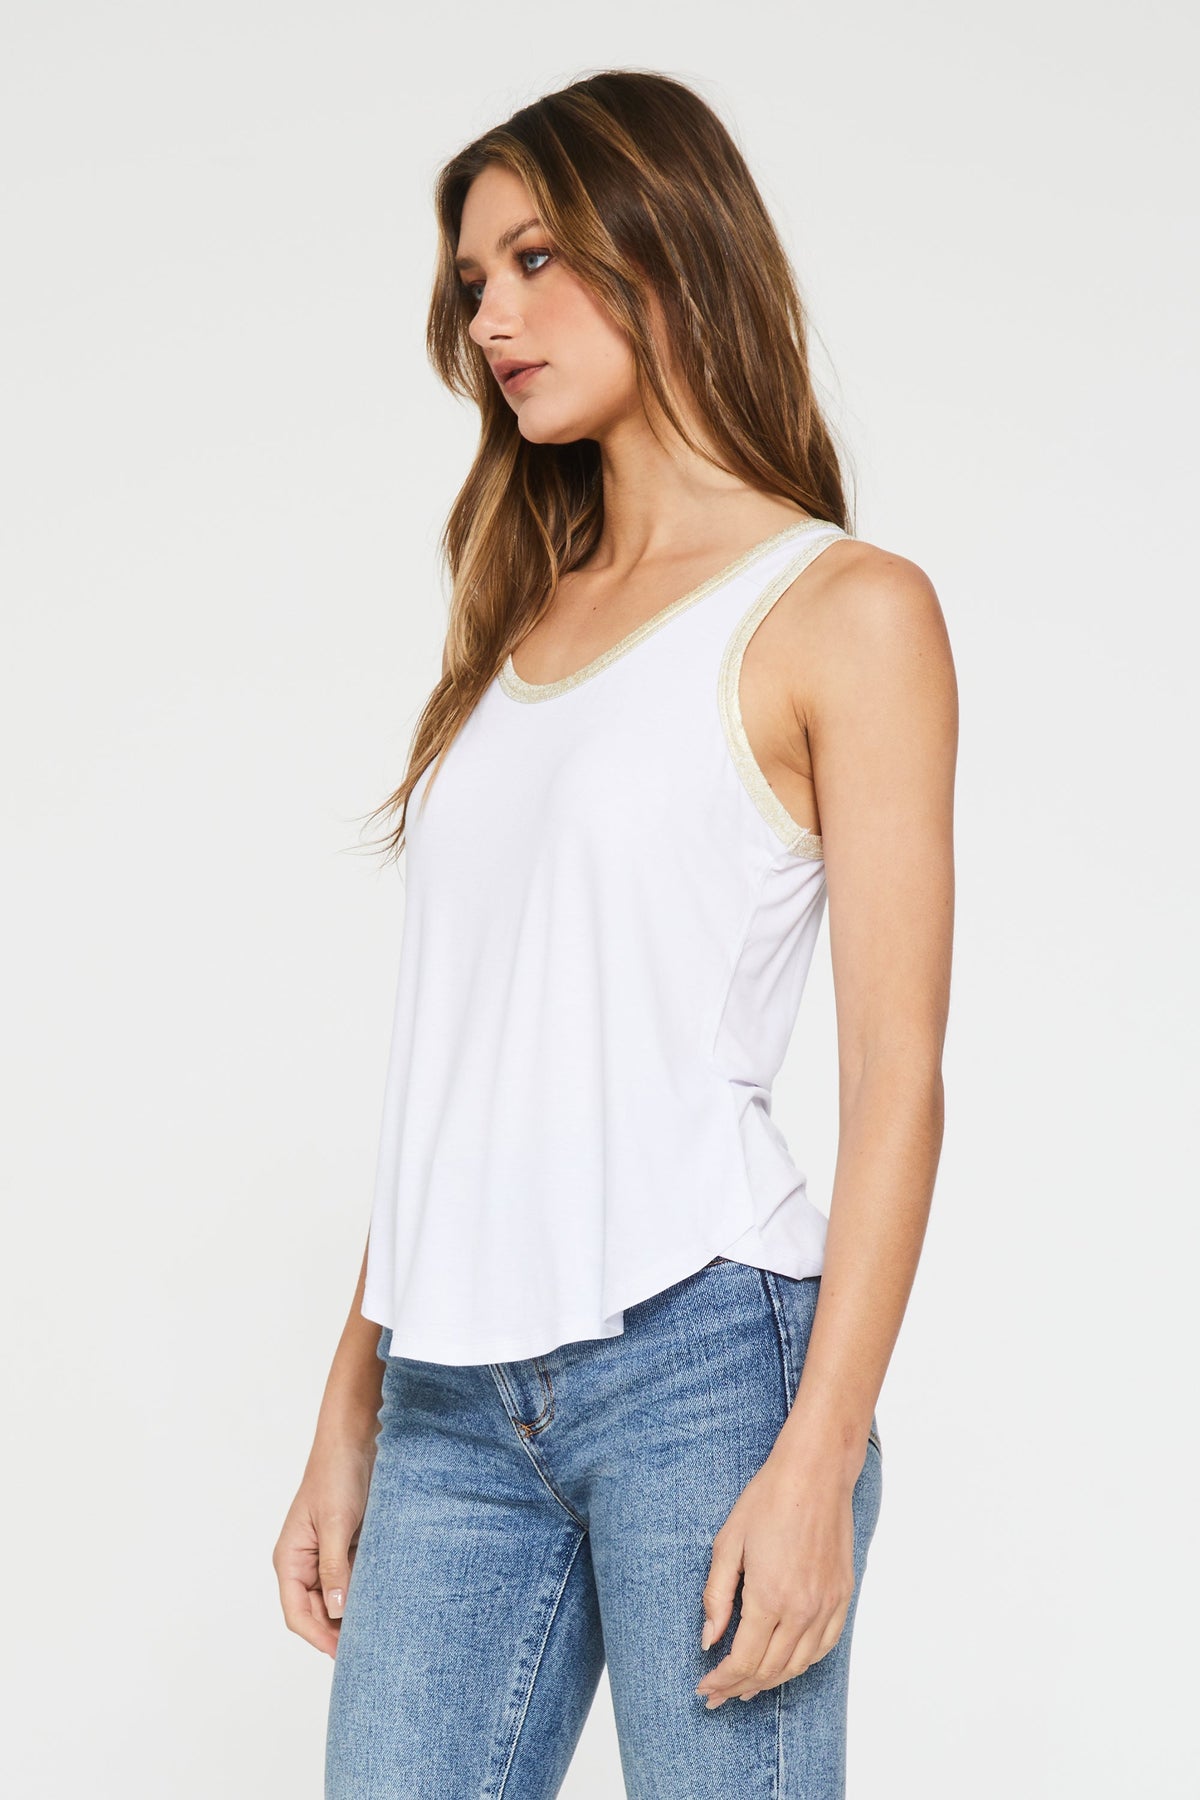 beatrice-foil-tank-top-white-side-image-another-love-clothing